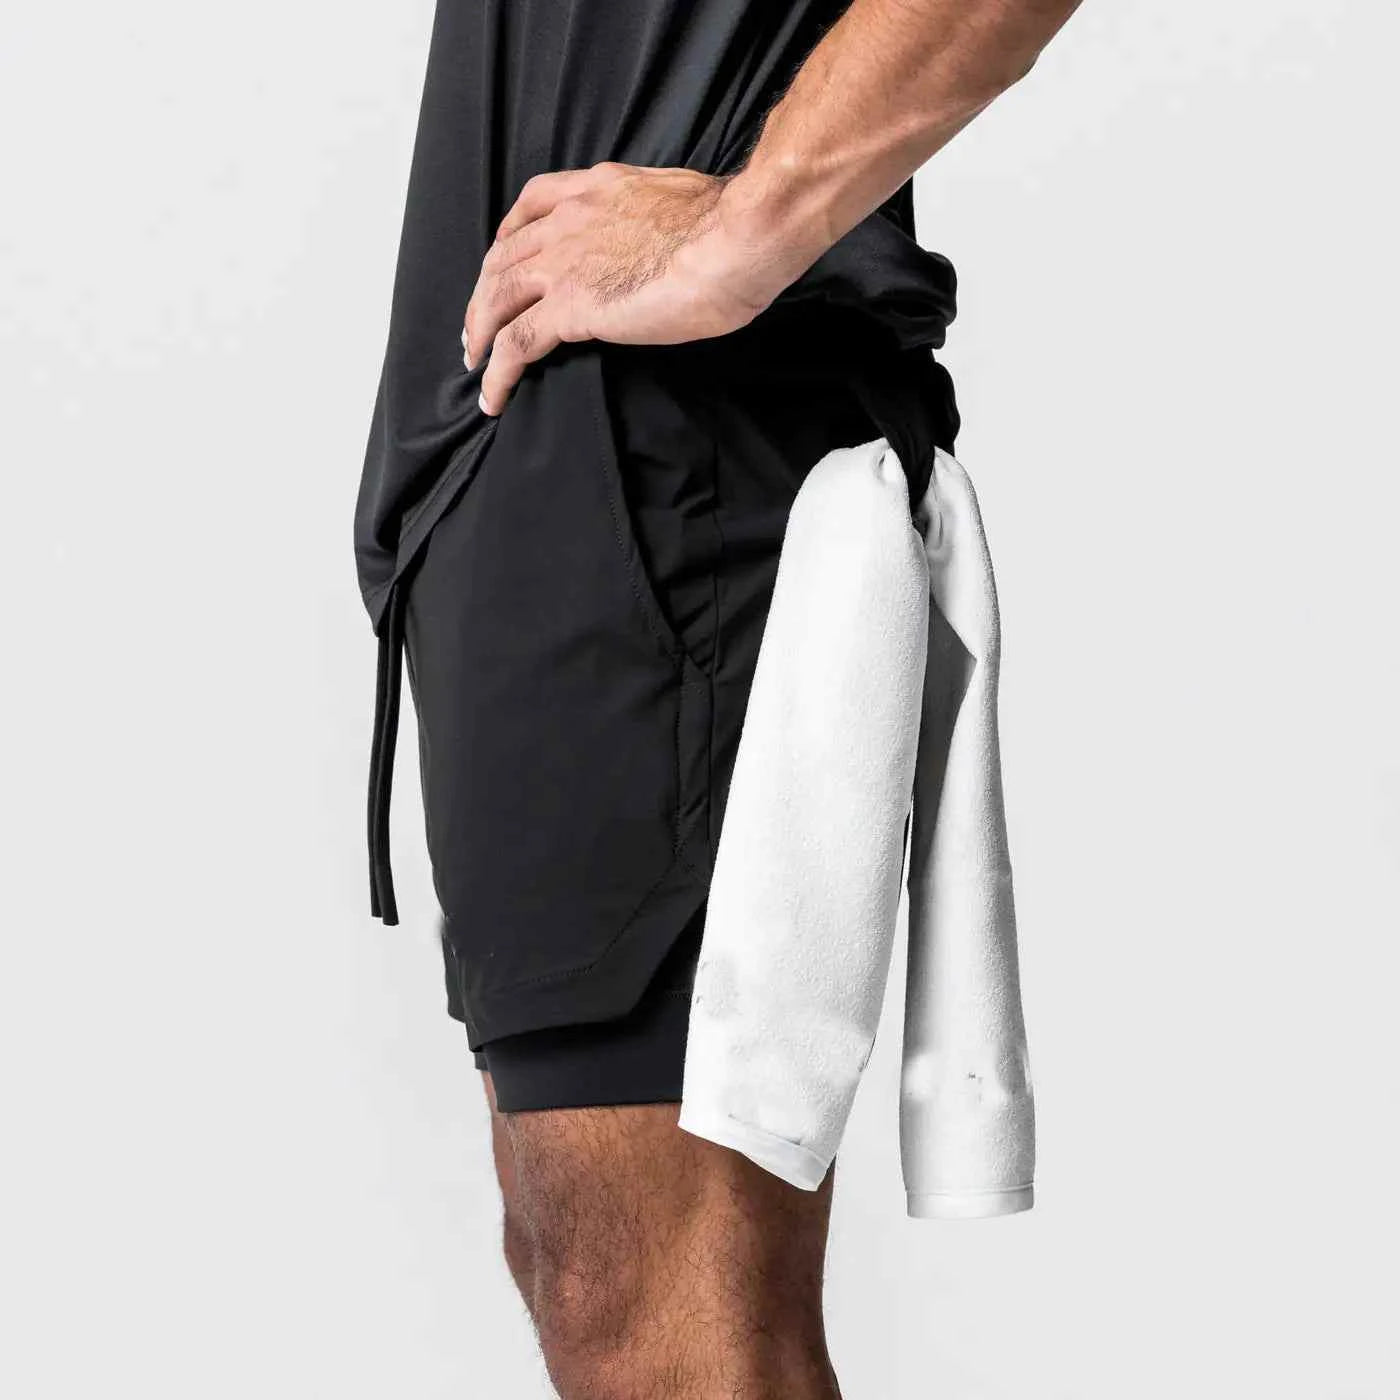 Men's Fitness Sports Shorts Running Muscle Training